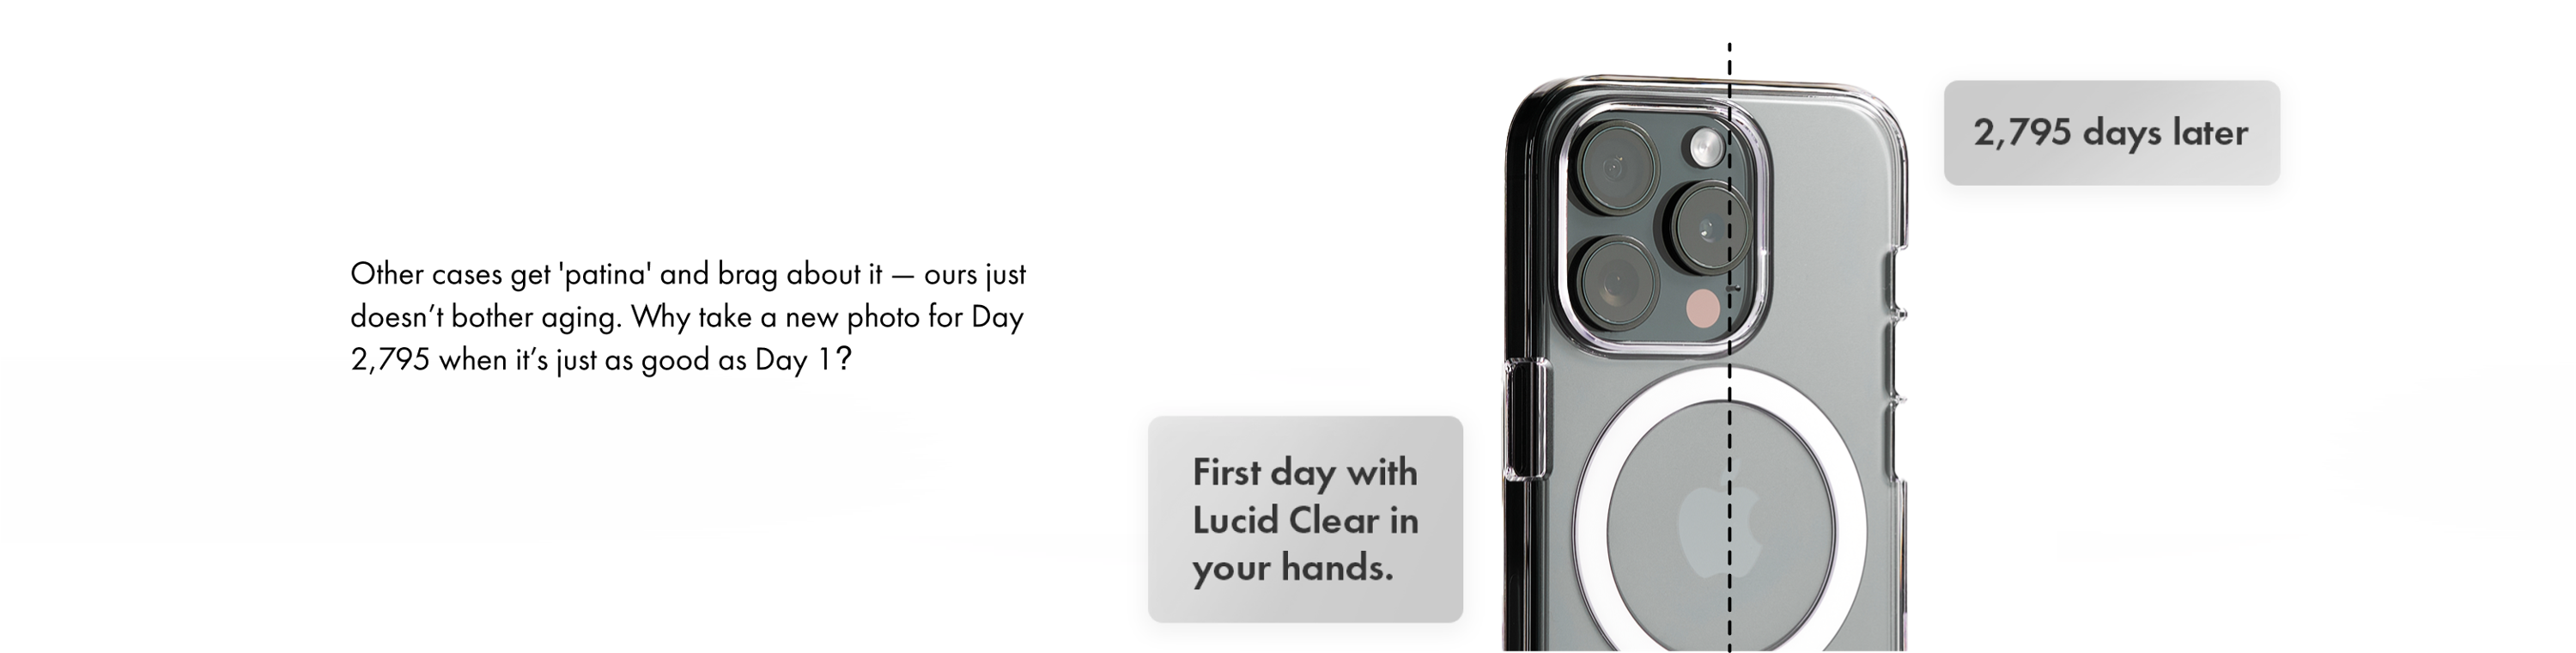 Other cases get 'patina' and brag about it — ours just doesn’t bother aging. Why take a new photo for Day 2,795 when it’s just as good as Day 1?. First day with Lucid Clear in your hands. 2795 days later. Looks the same